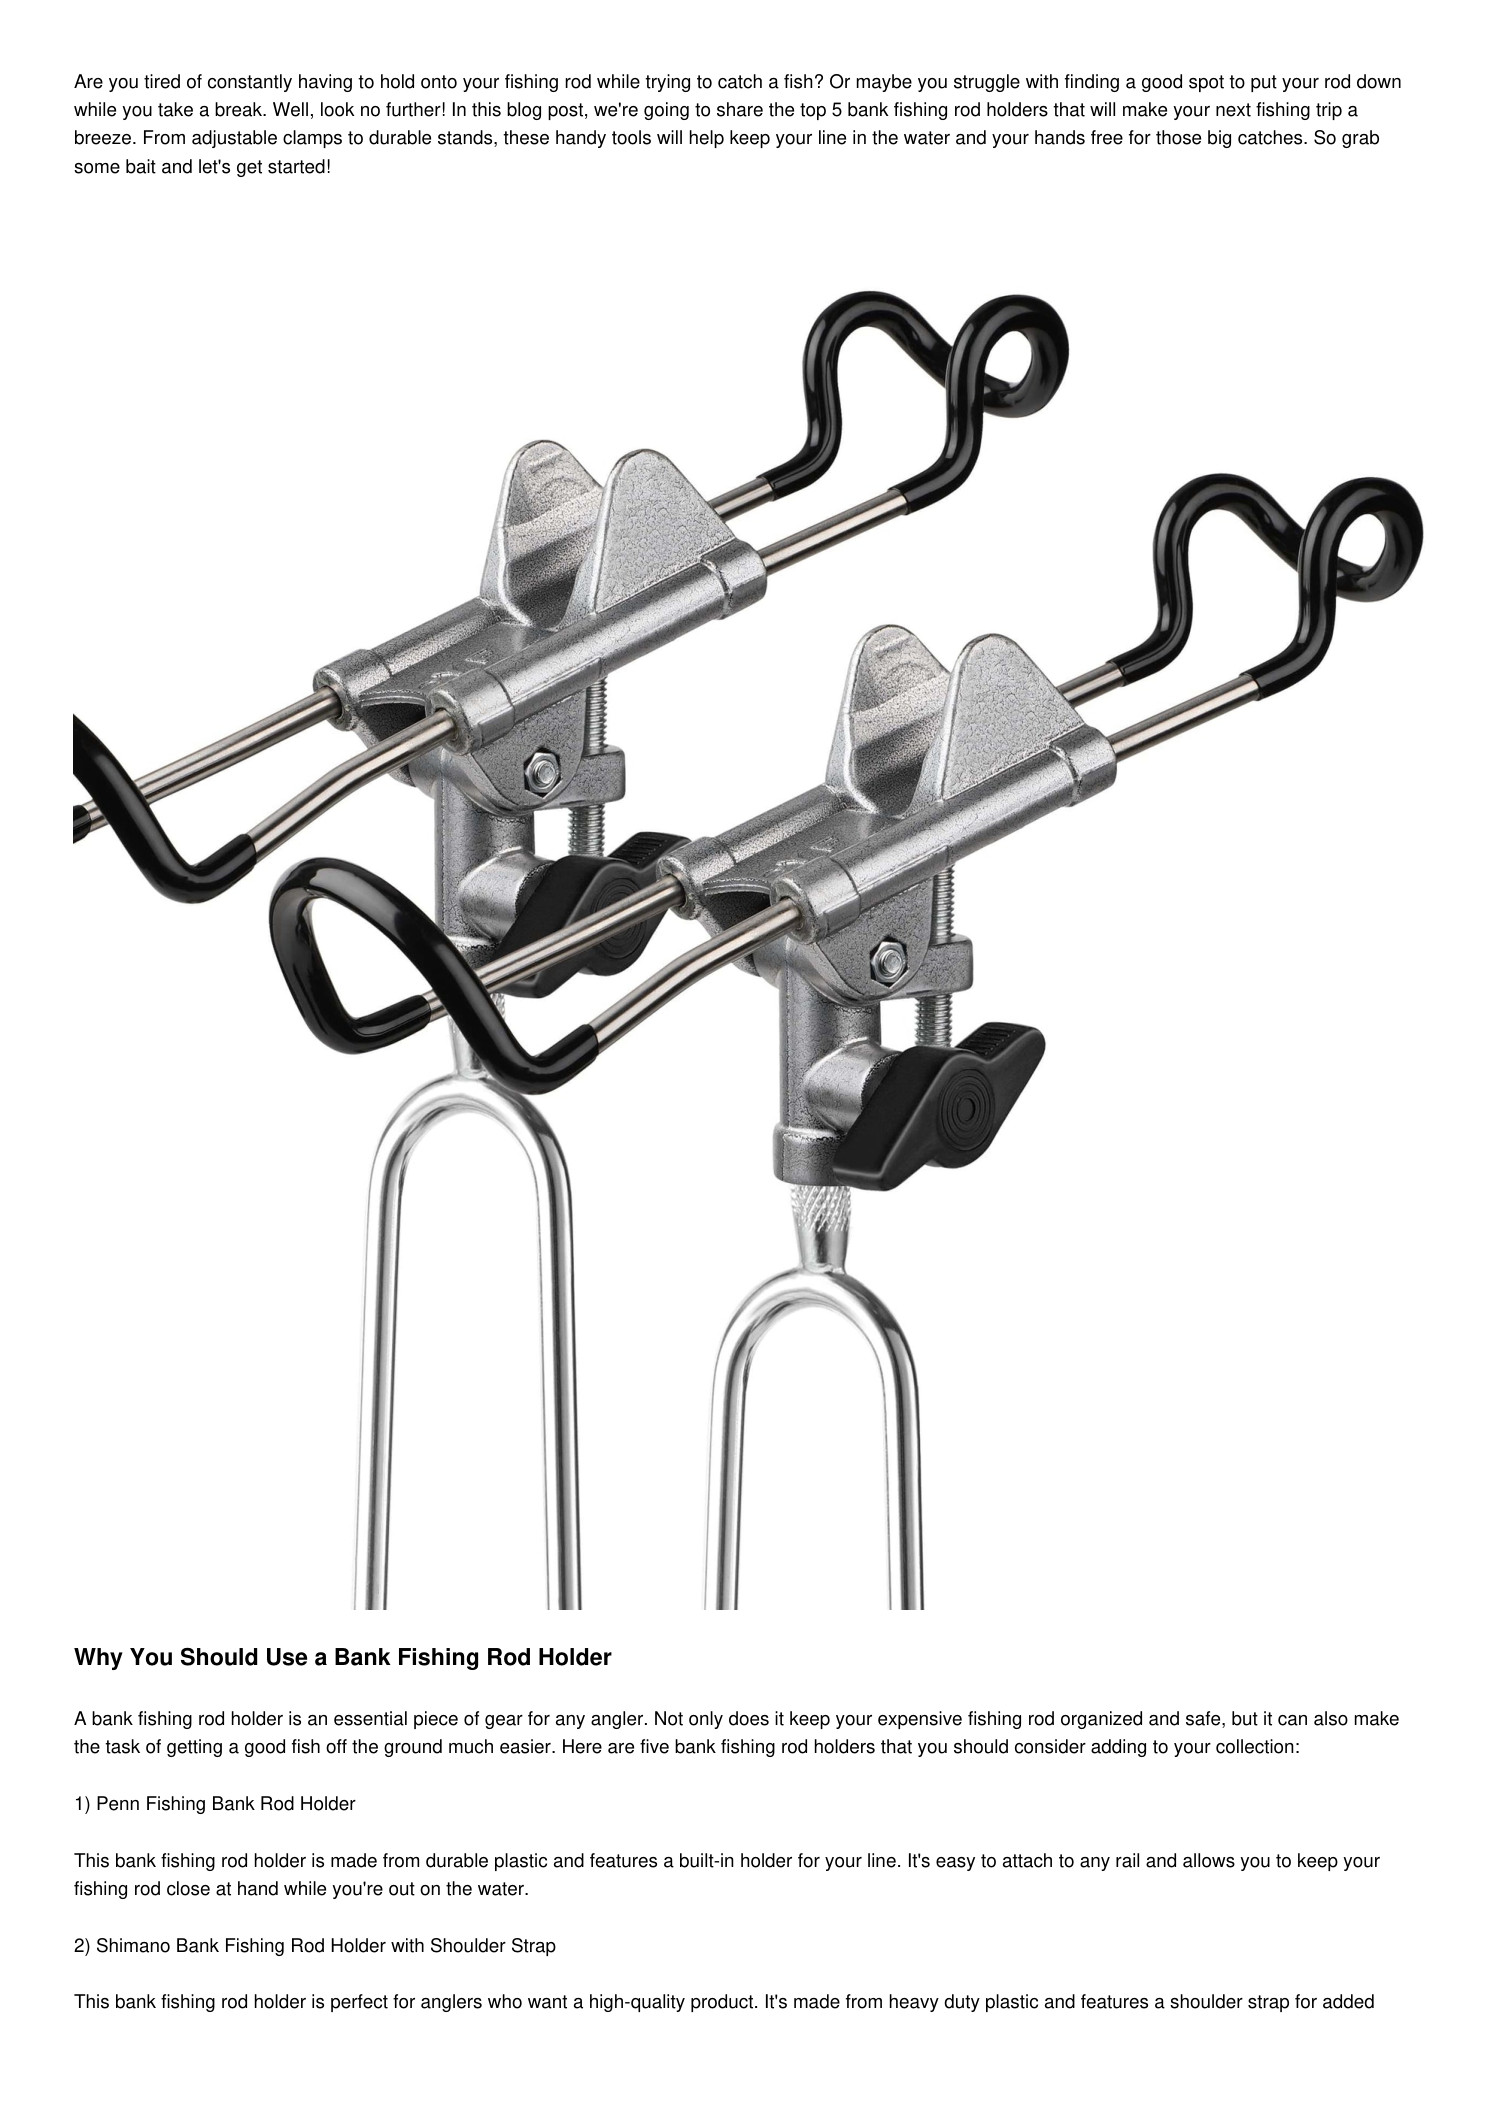 Top 5 Bank Fishing Rod Holders You Need for Your Next Fishing Trip.pdf